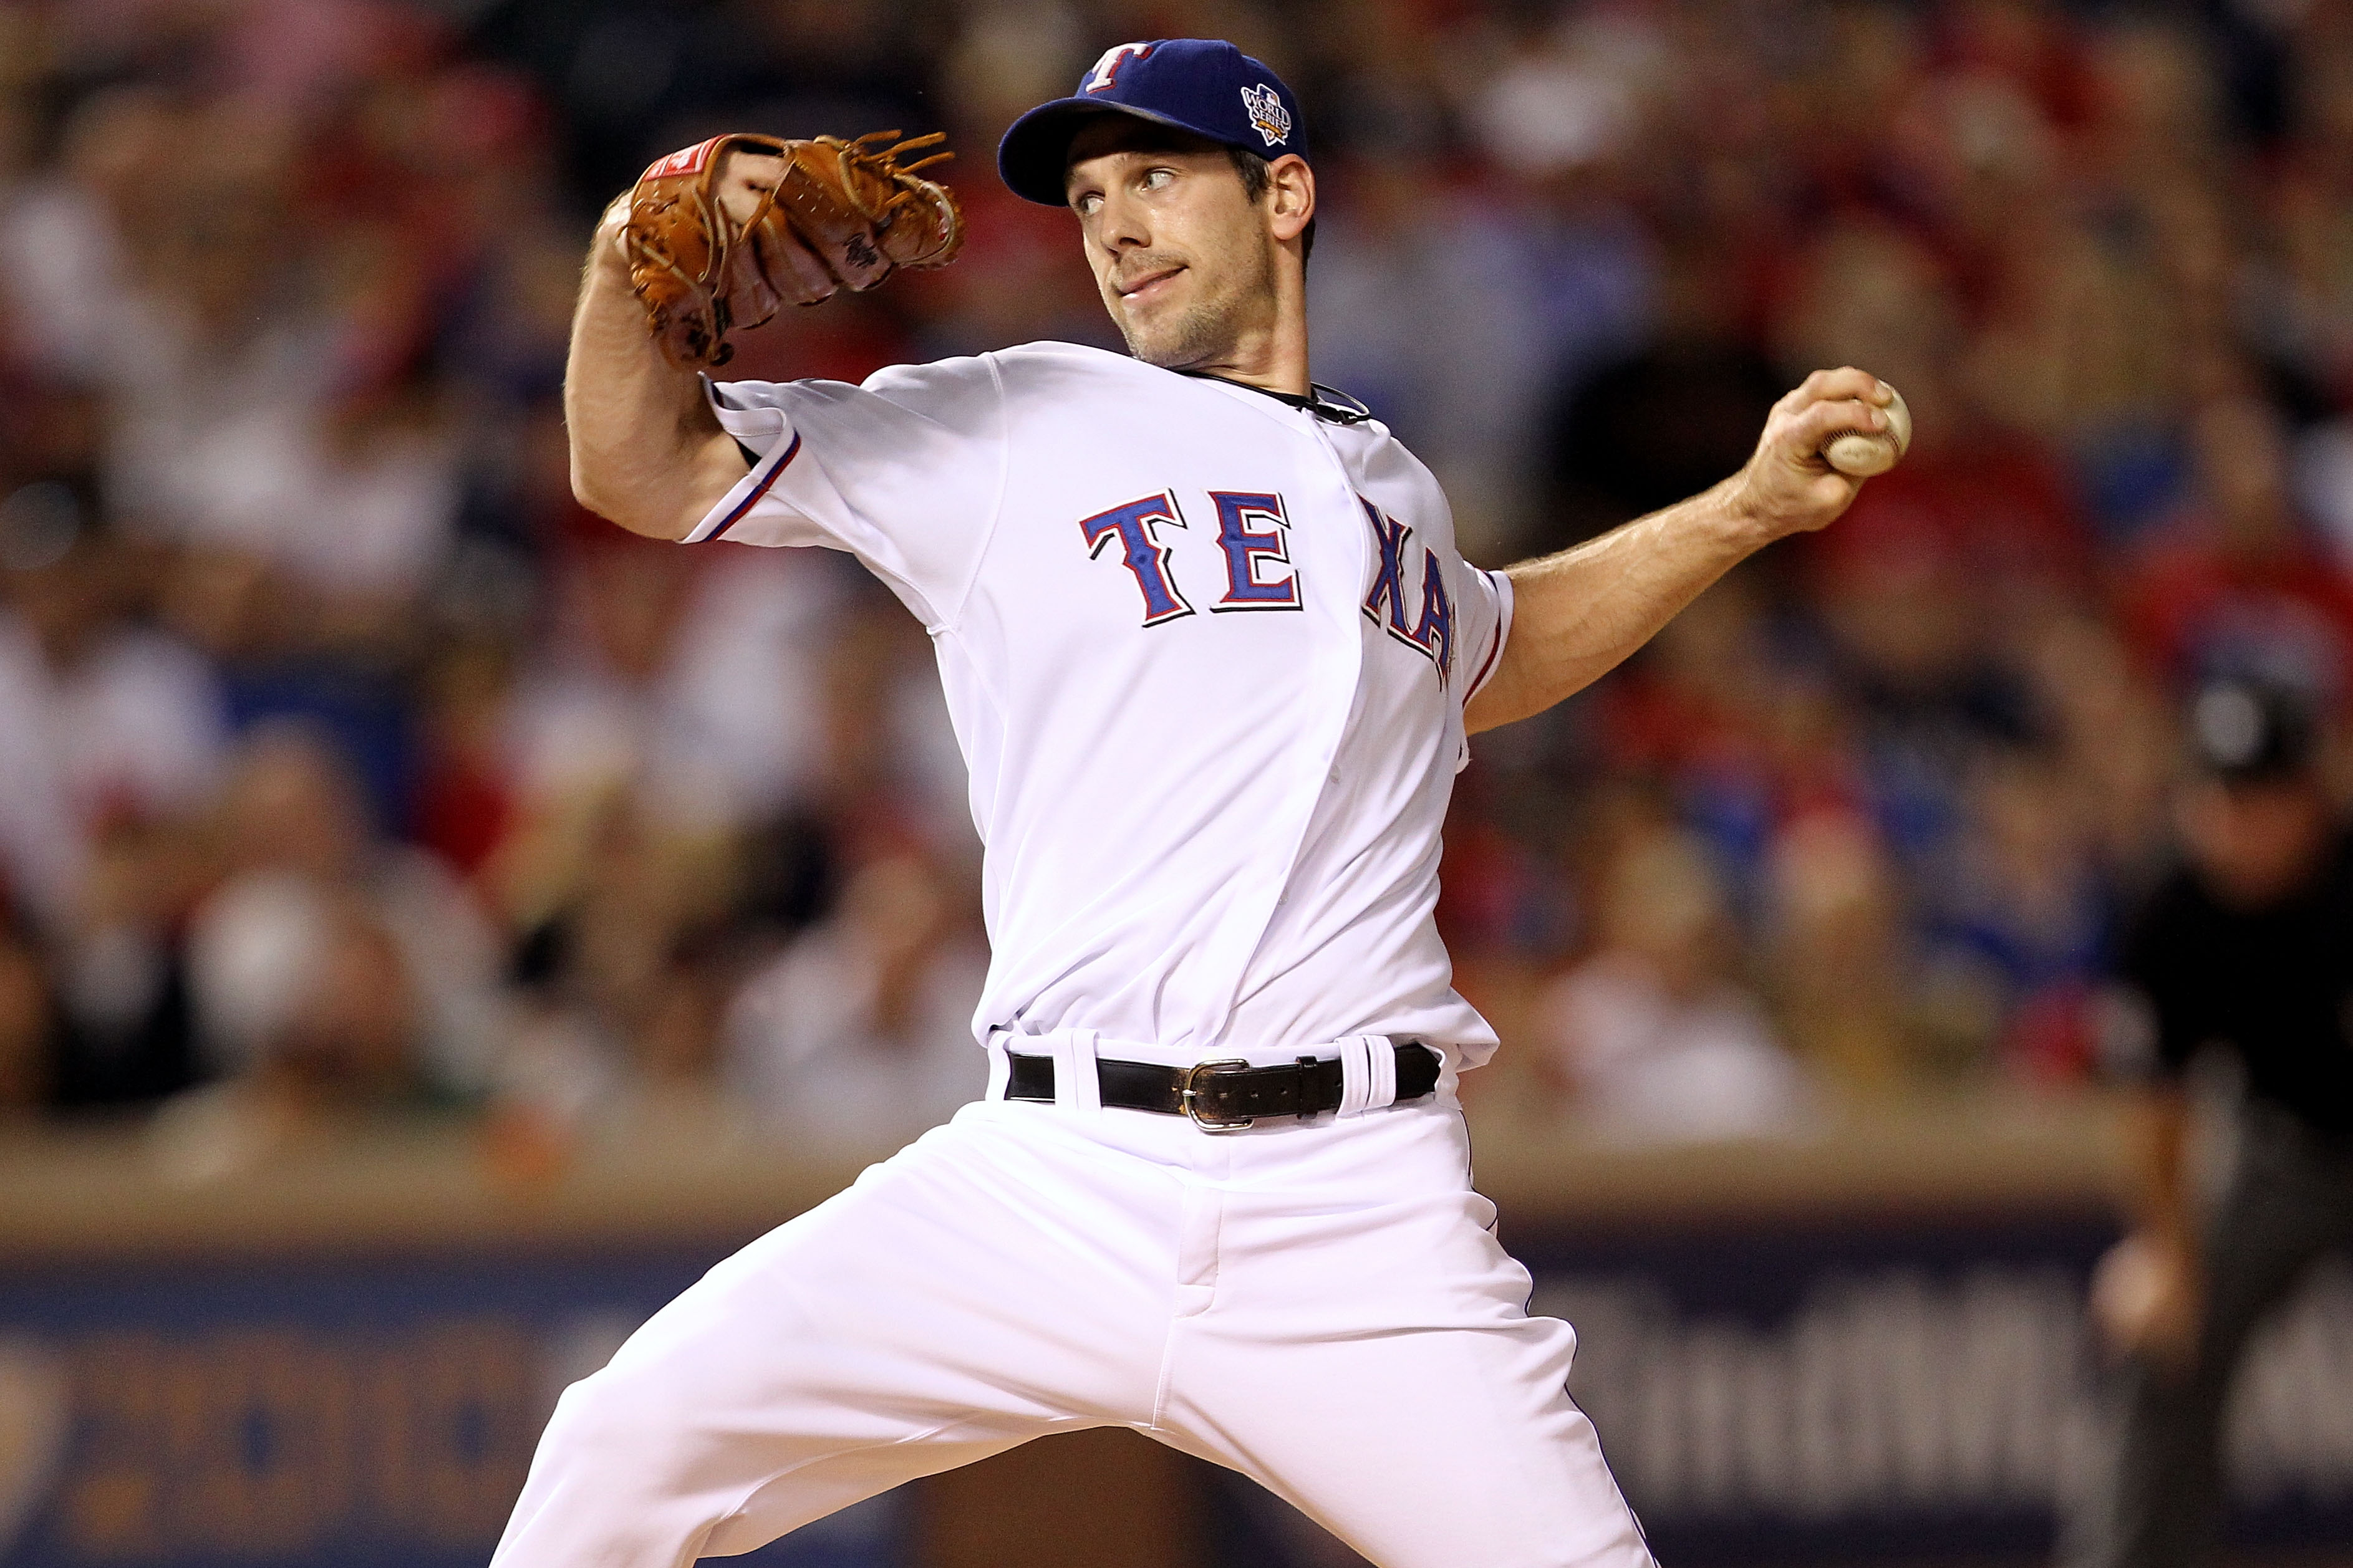 ARLINGTON, TX - NOVEMBER 01:  Cliff Lee #33 of the Texas Rangers pitches against the San Francisco Giants in Game Five of the 2010 MLB World Series at Rangers Ballpark in Arlington on November 1, 2010 in Arlington, Texas.  (Photo by Ronald Martinez/Getty